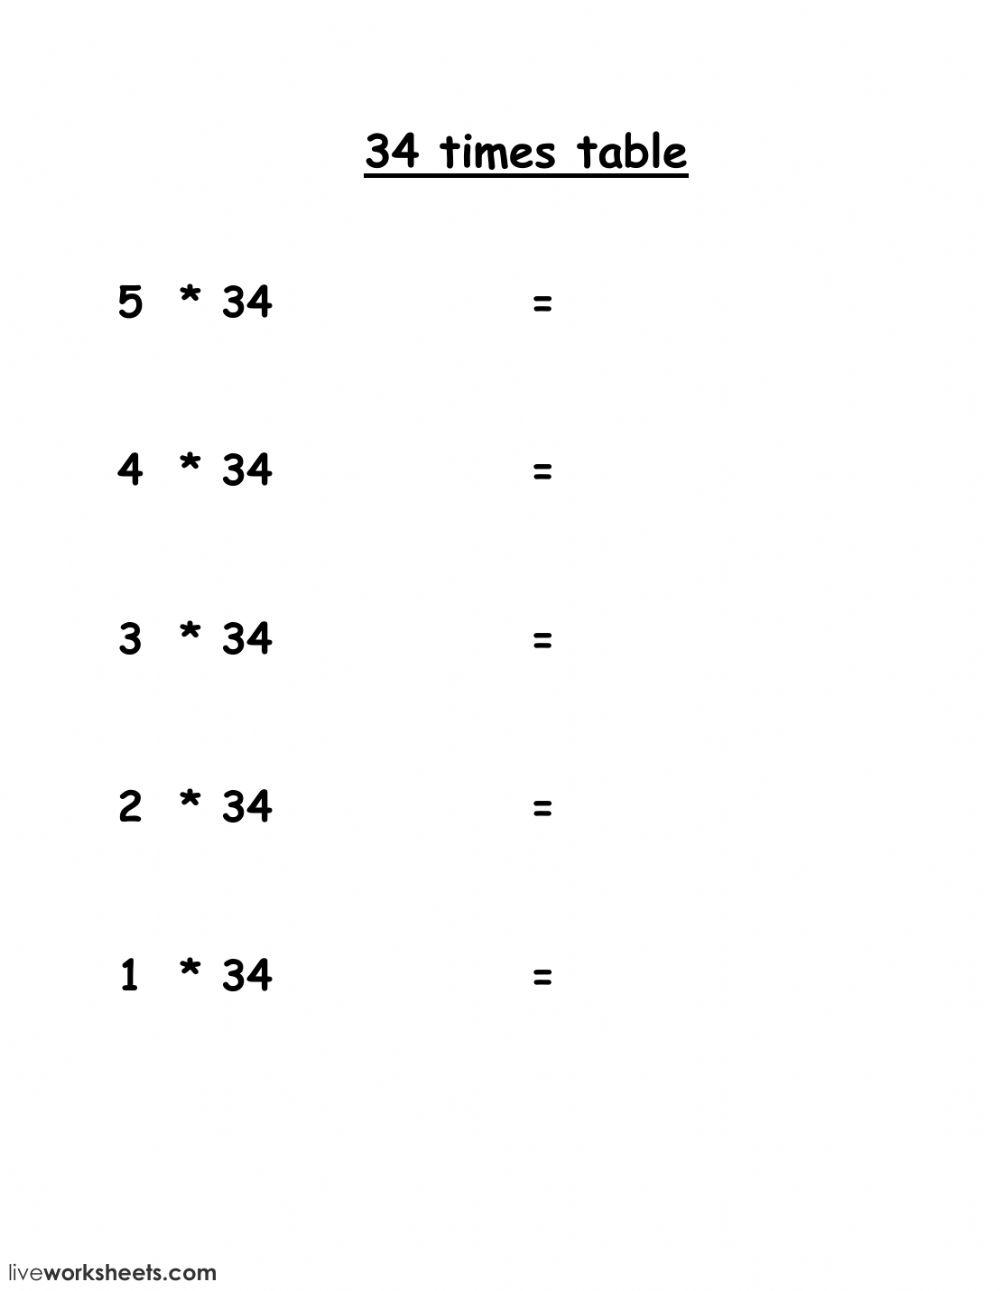 34 times table